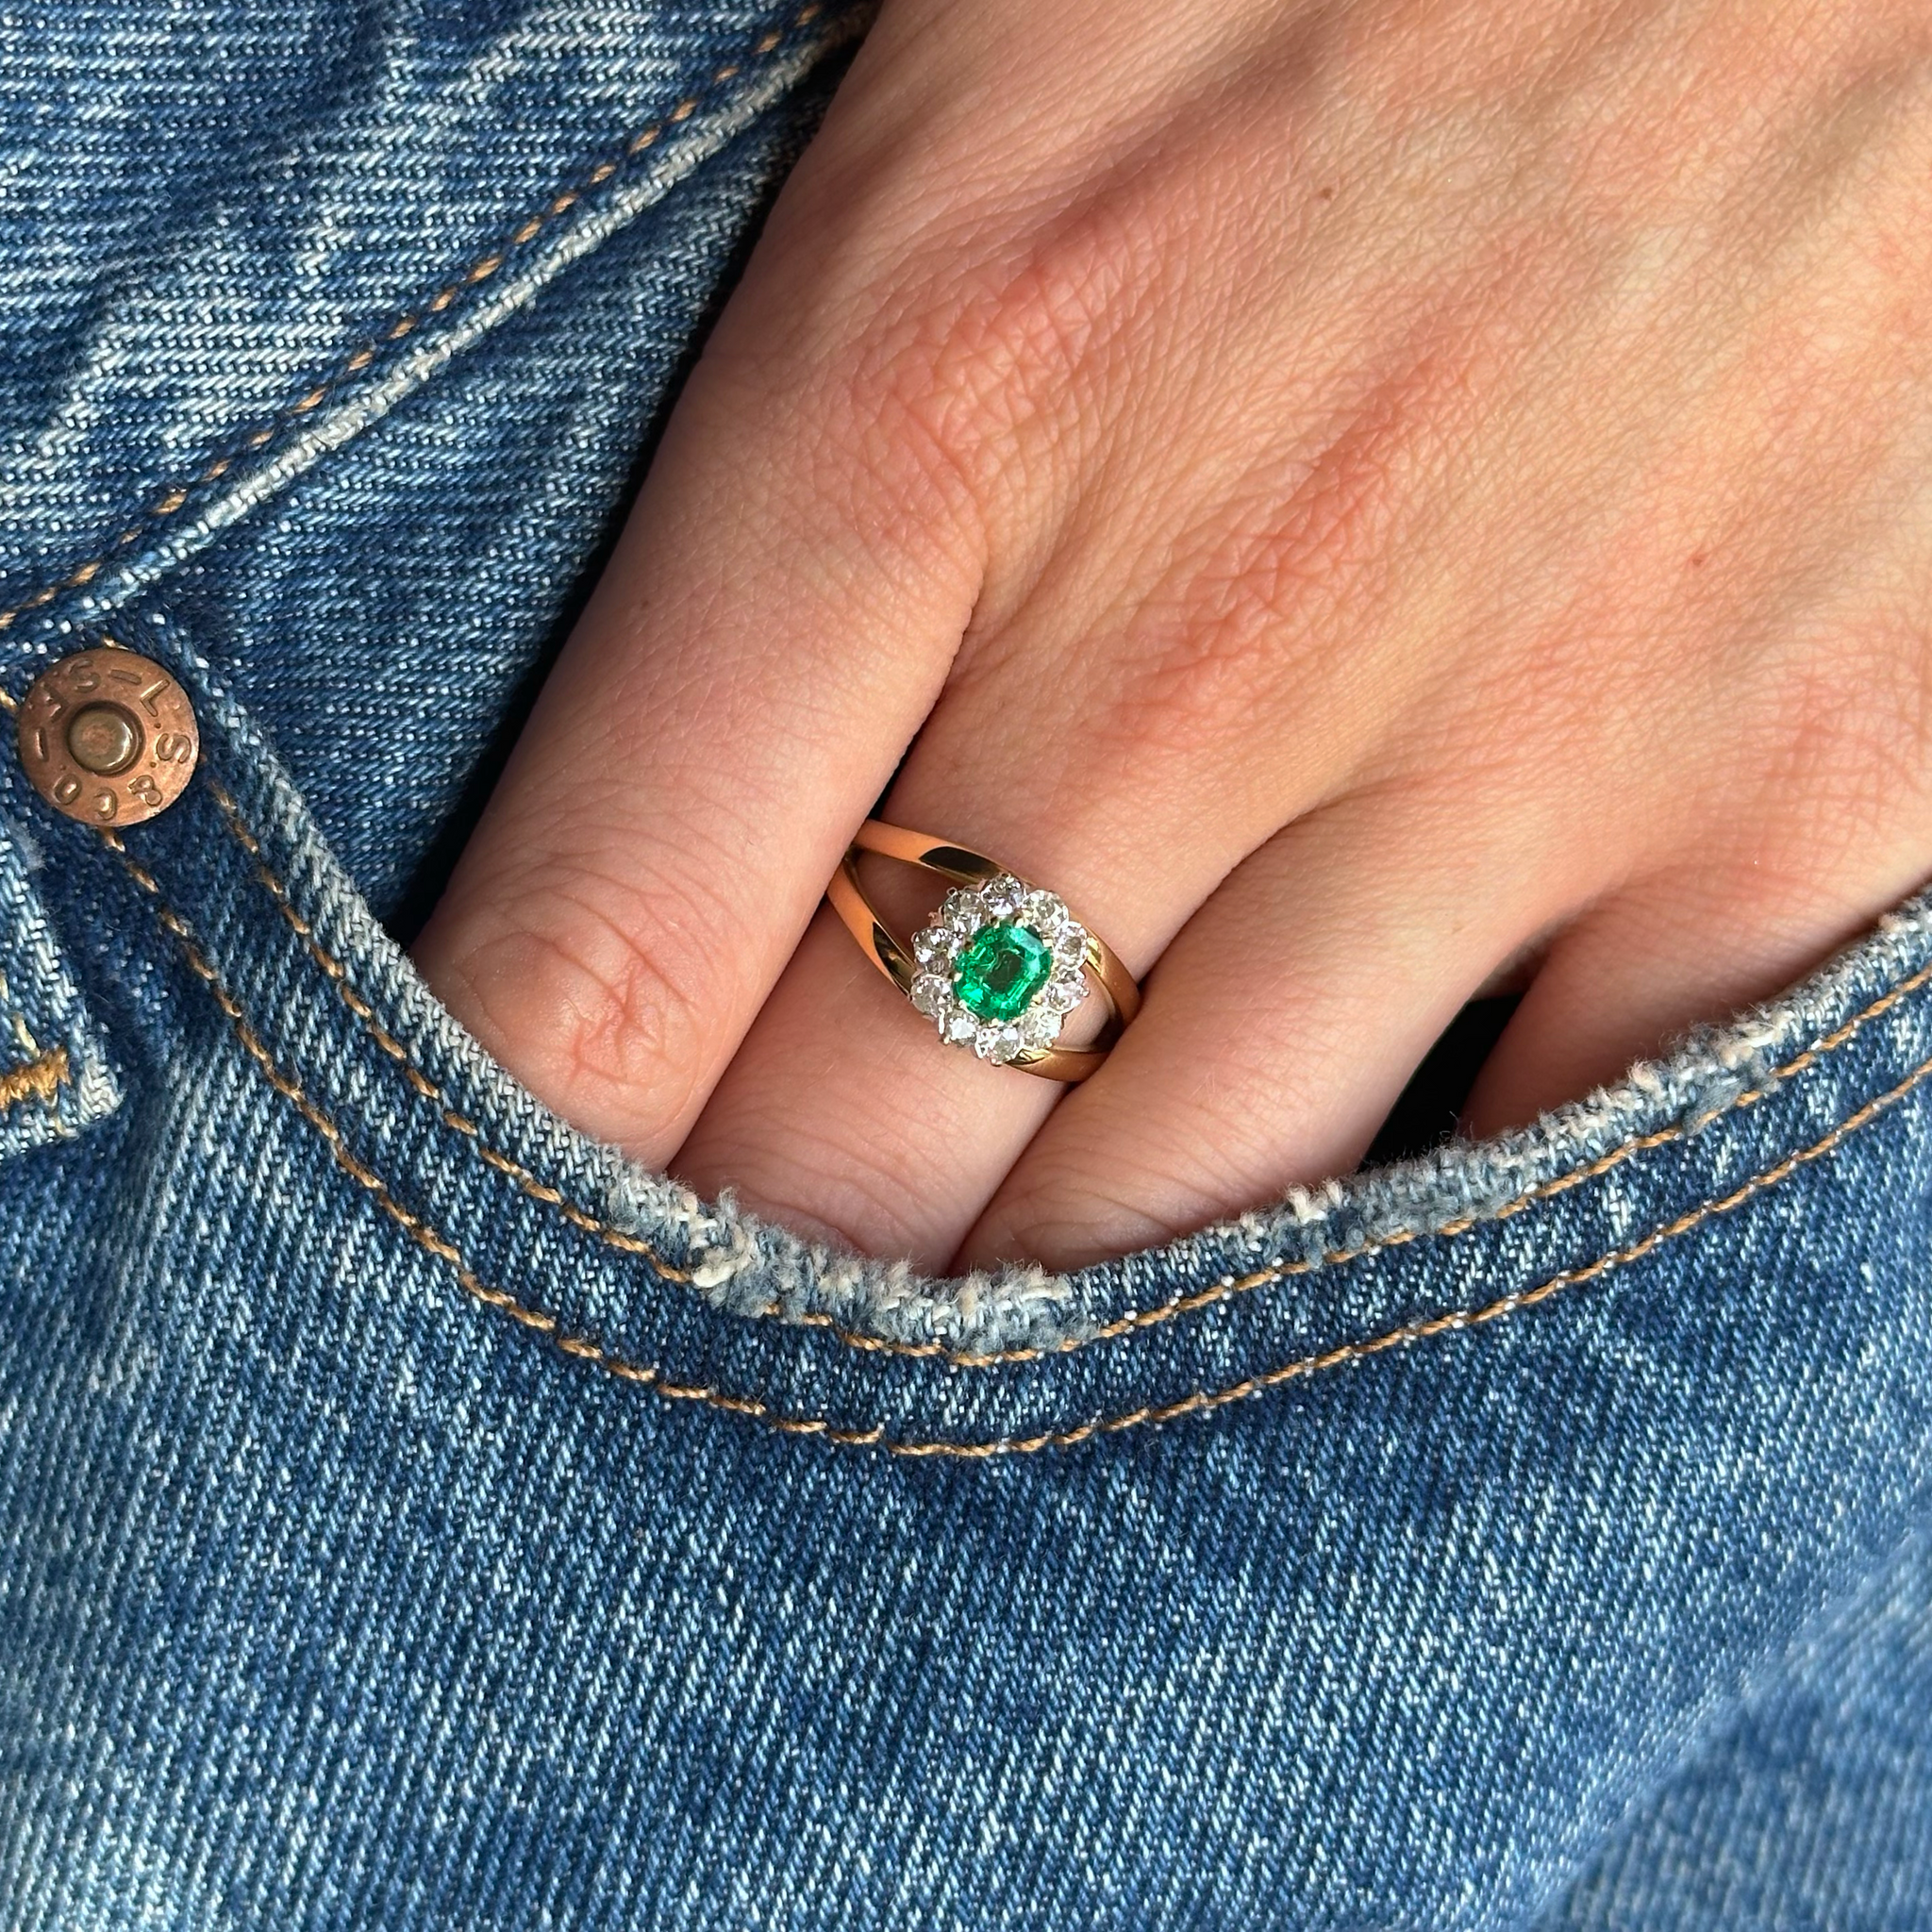 Emerald and diamond ring on hand inside pocket of jeans